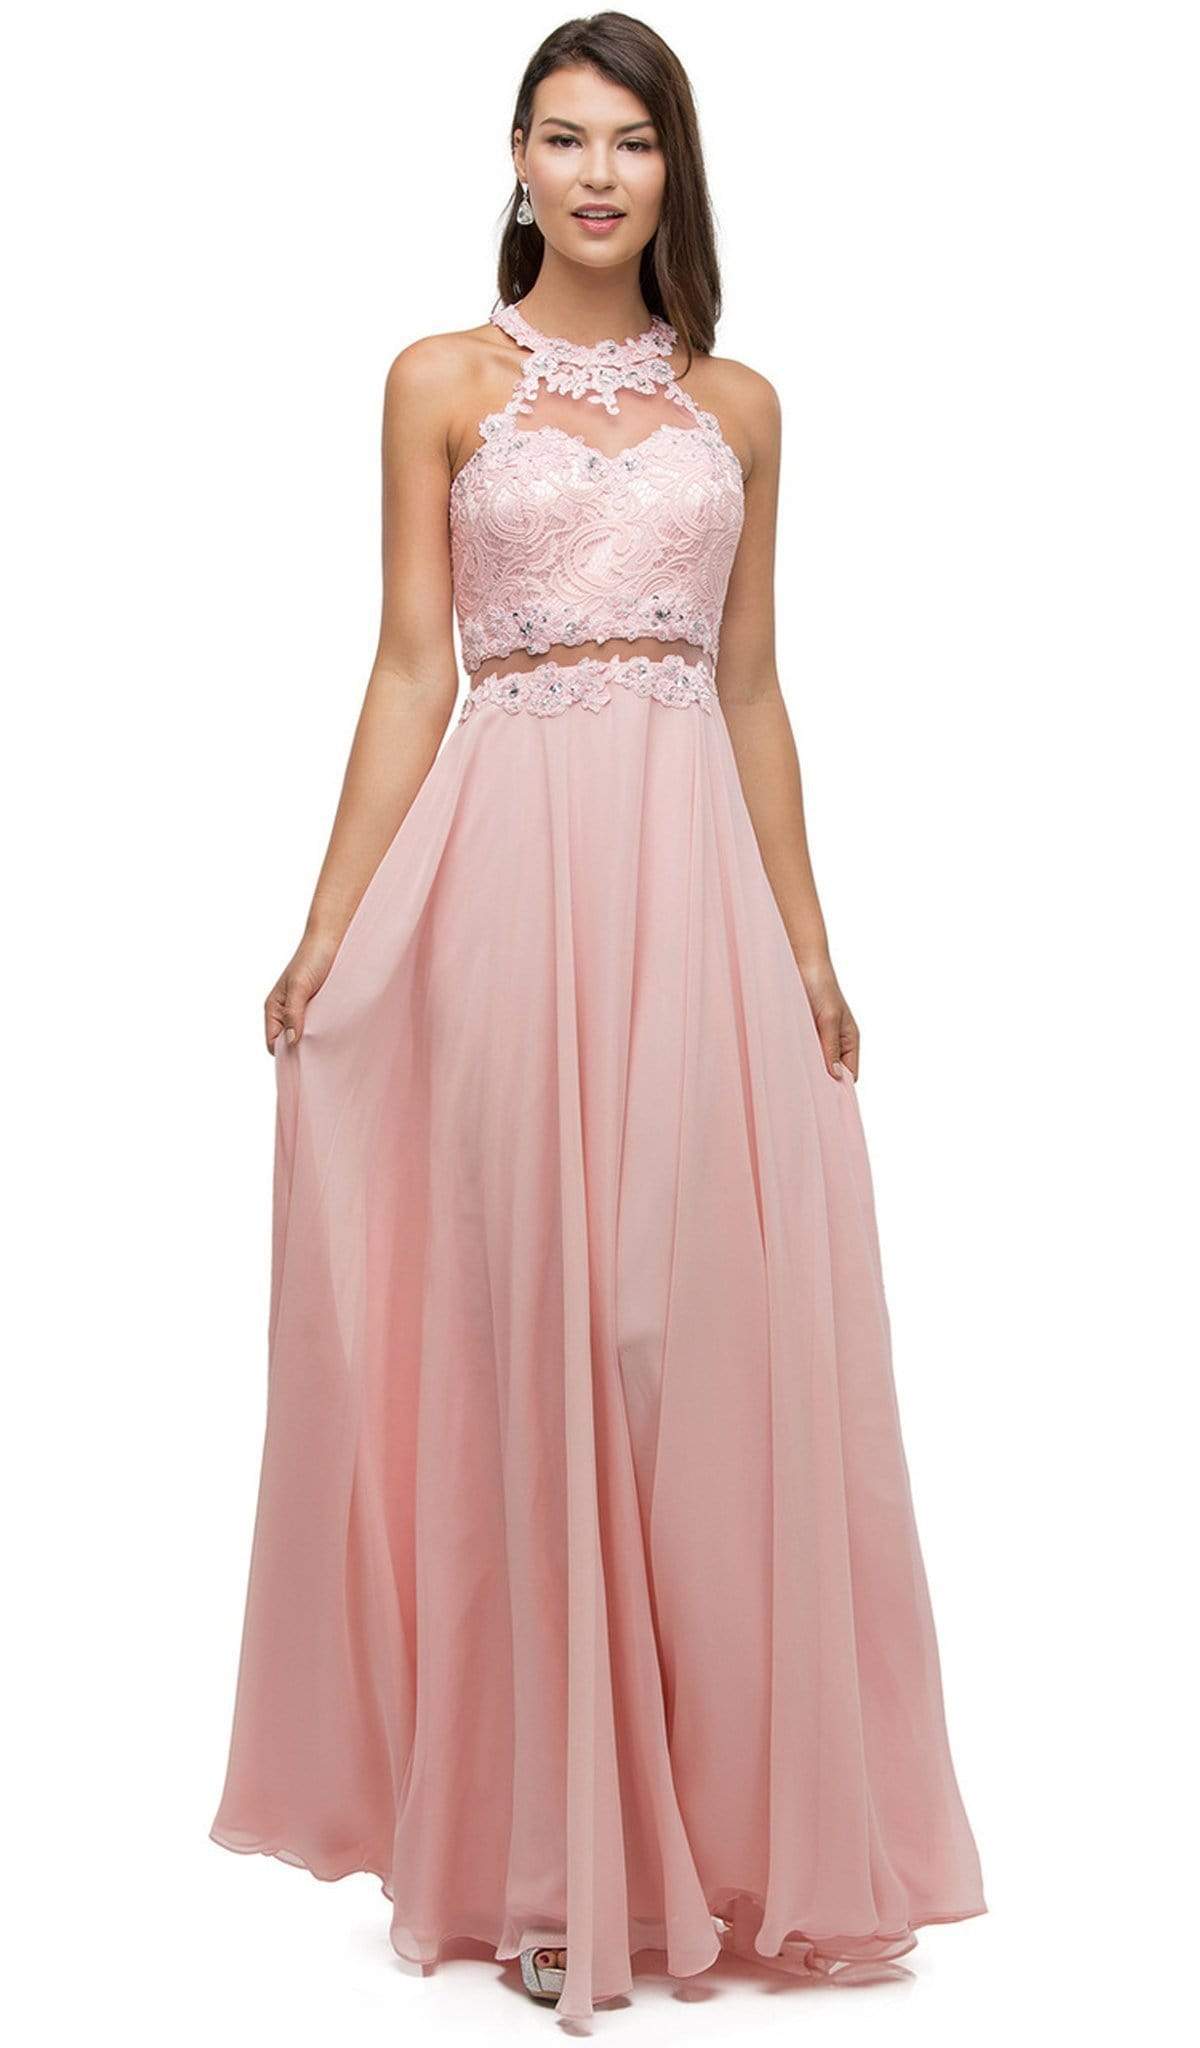 Image of Dancing Queen - 9548 Jeweled Illusion Halter Chiffon Prom Dress